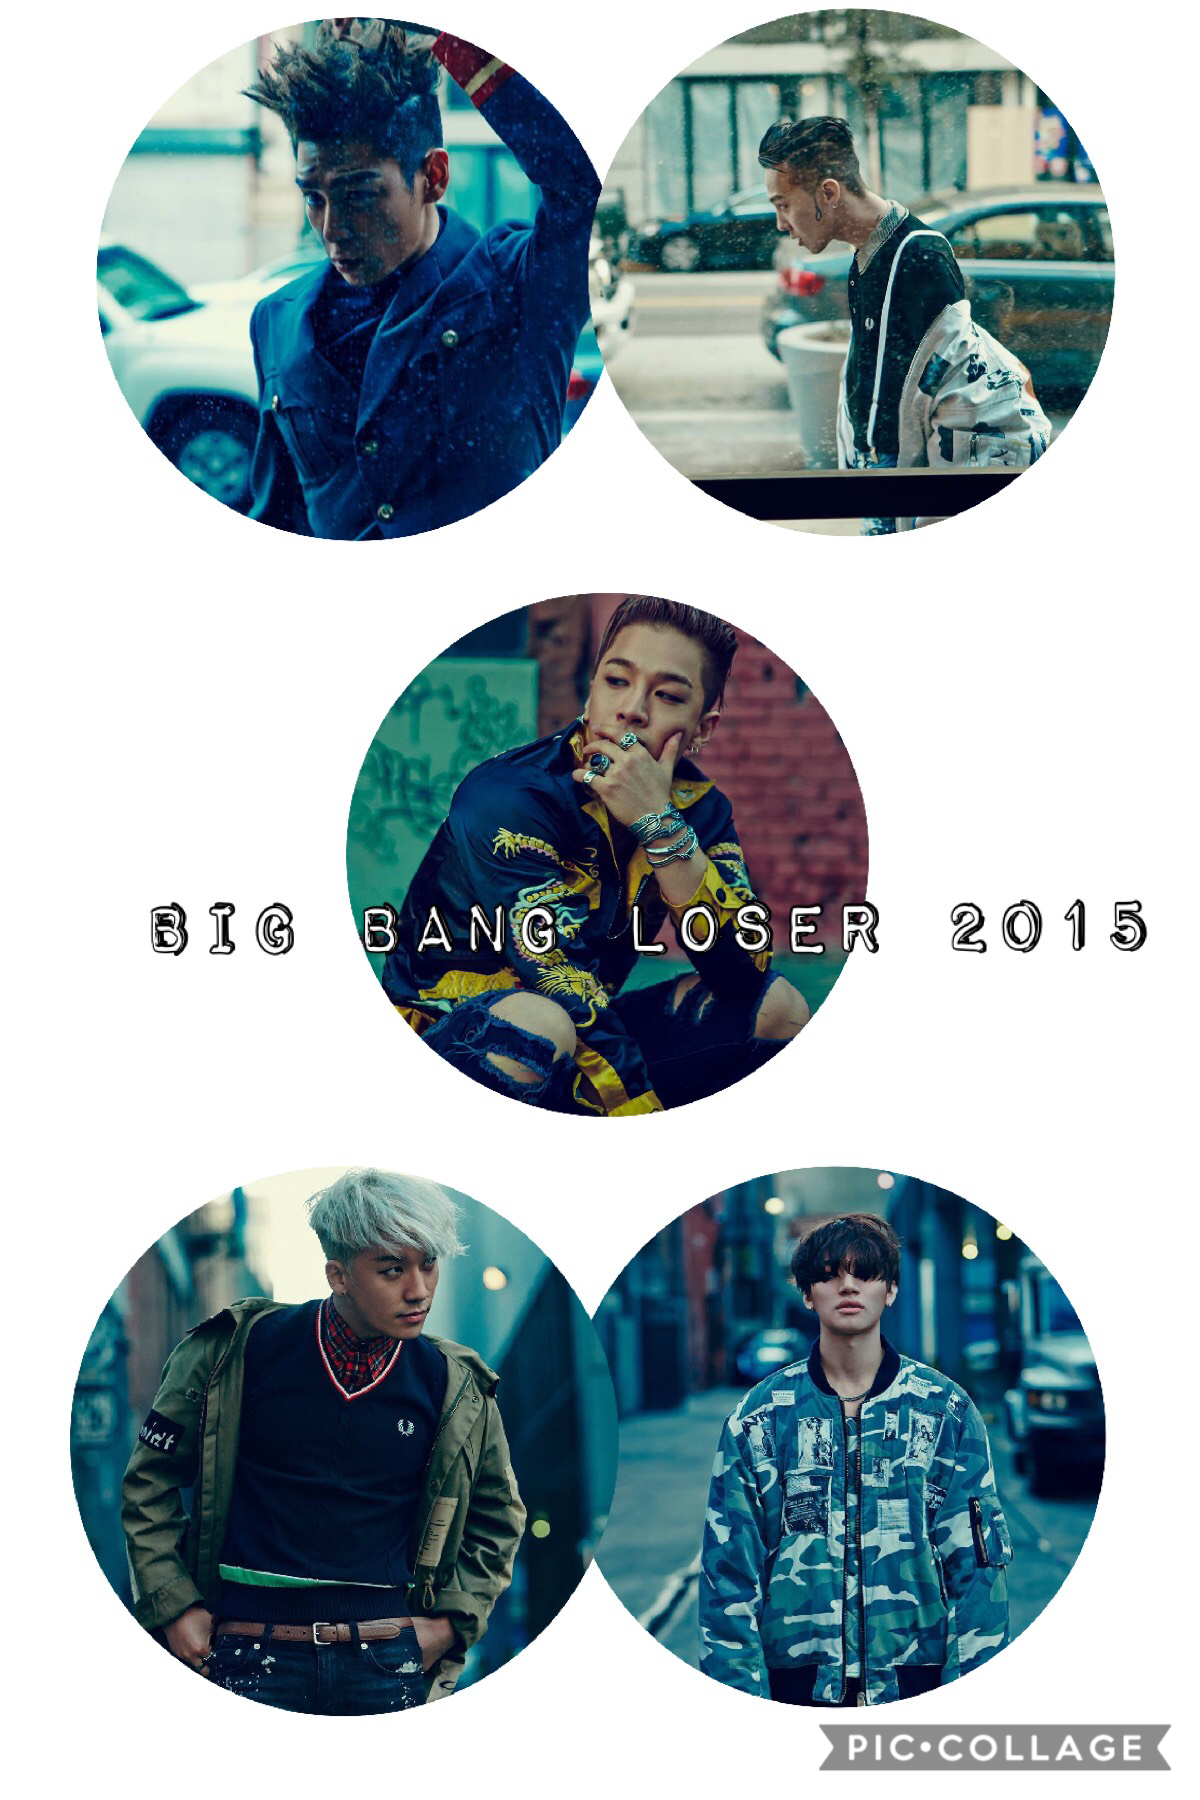 TAP☝🏼/
Big Bang loser 2015🤧
Everyone I’m sorry that I haven’t posted in forever and now I’m back with my new phone to post stuff 😄
Also I was going to do fantastic baby and monster college but I couldn’t find good pictures😕and once again I’m sorry for not